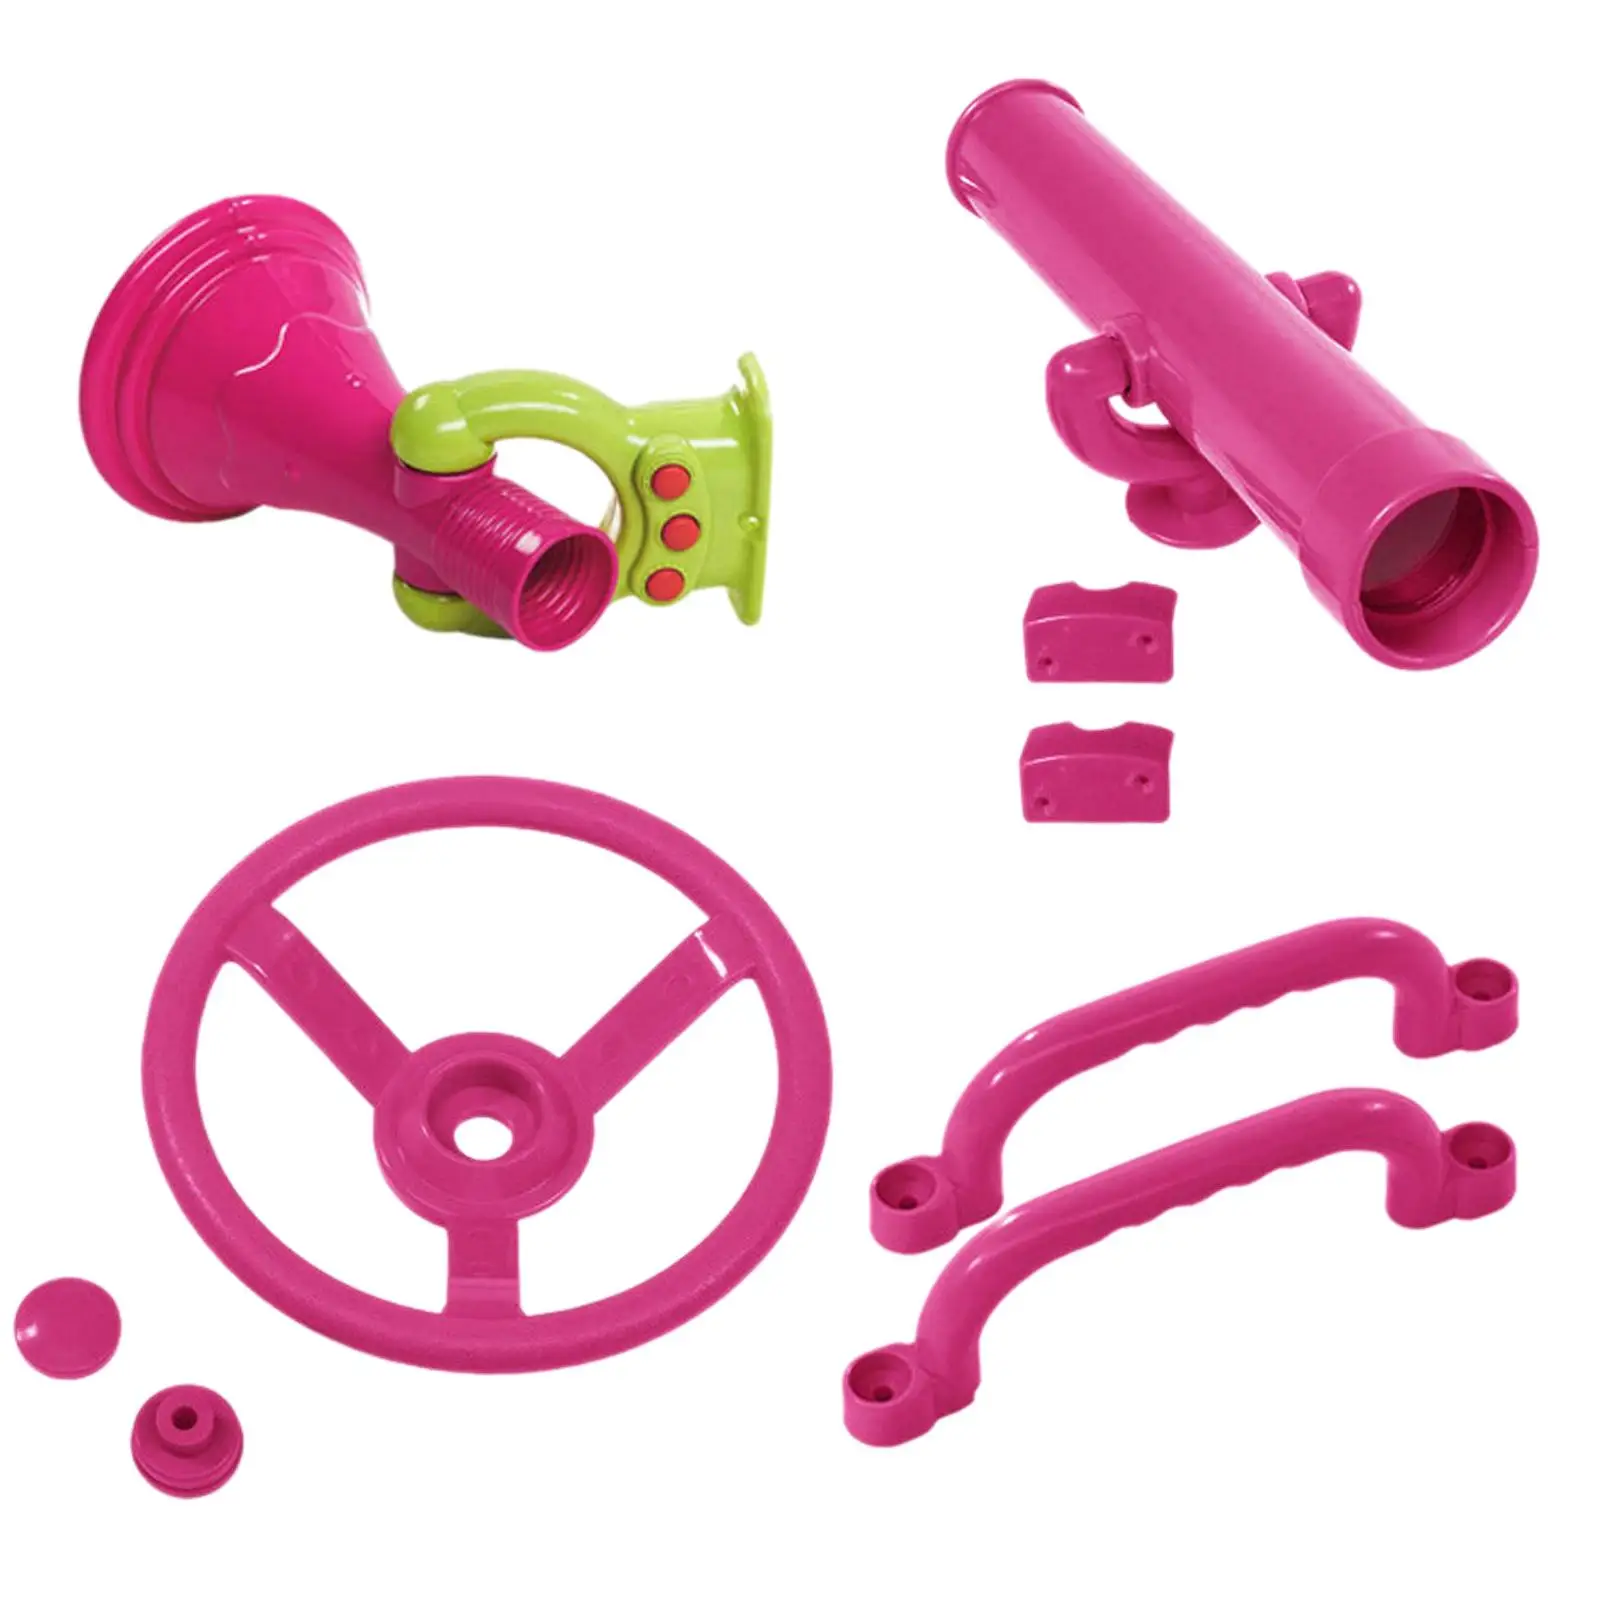 4 Pieces Playground Accessories Pink Pirate Telescope Swingset Attachments for Outdoor Playhouse Swingset Backyard Boys Girls